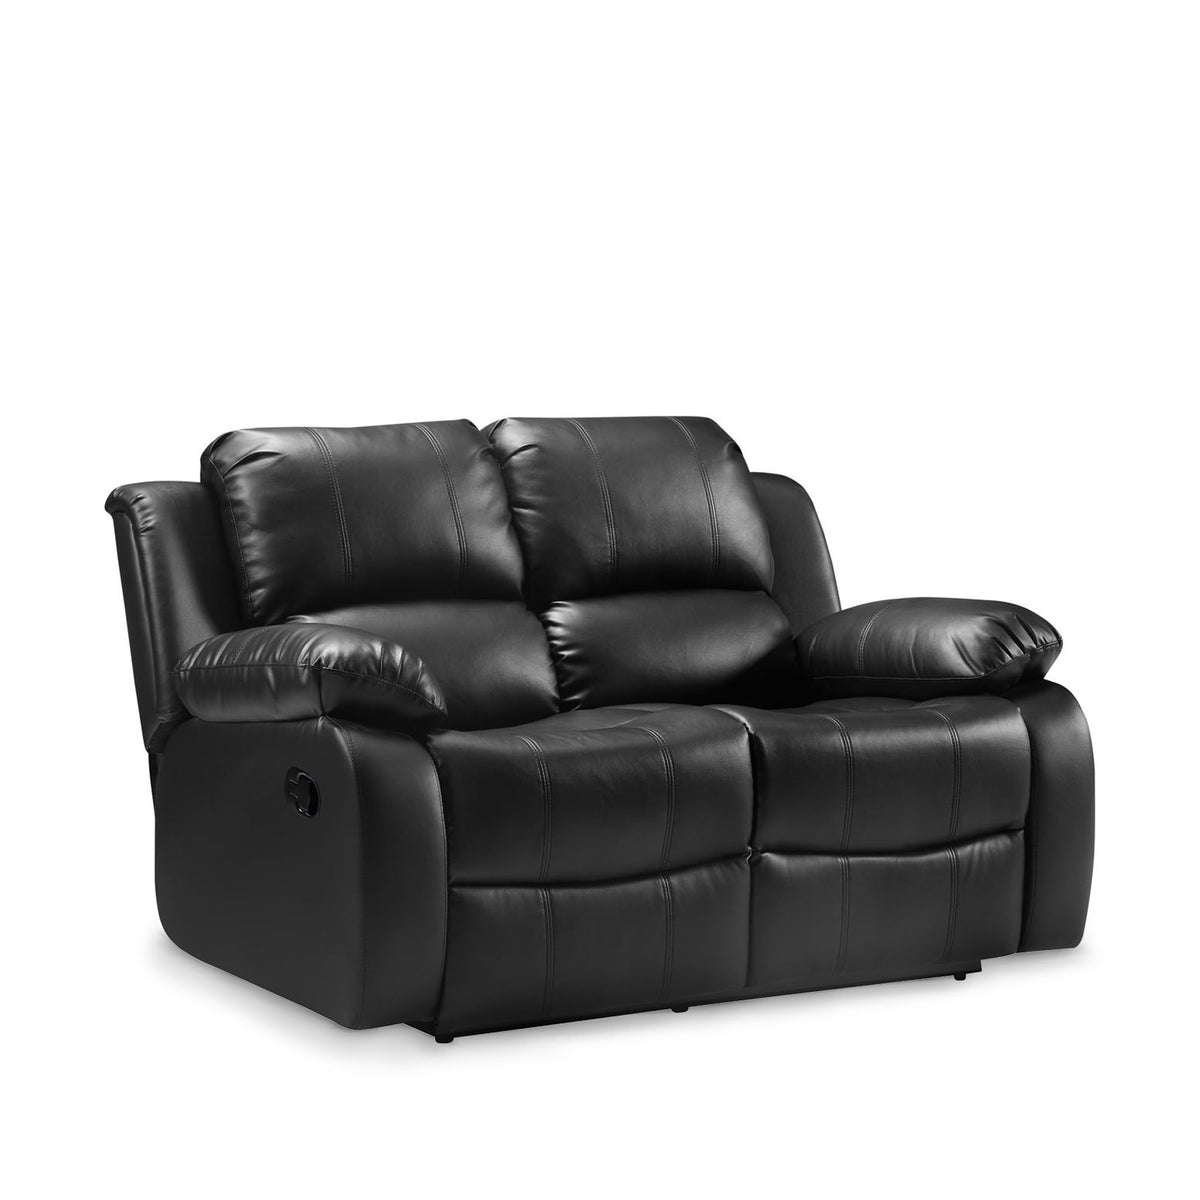 Valencia Black 2 Seater Reclining Air Leather Sofa by Roseland Furniture